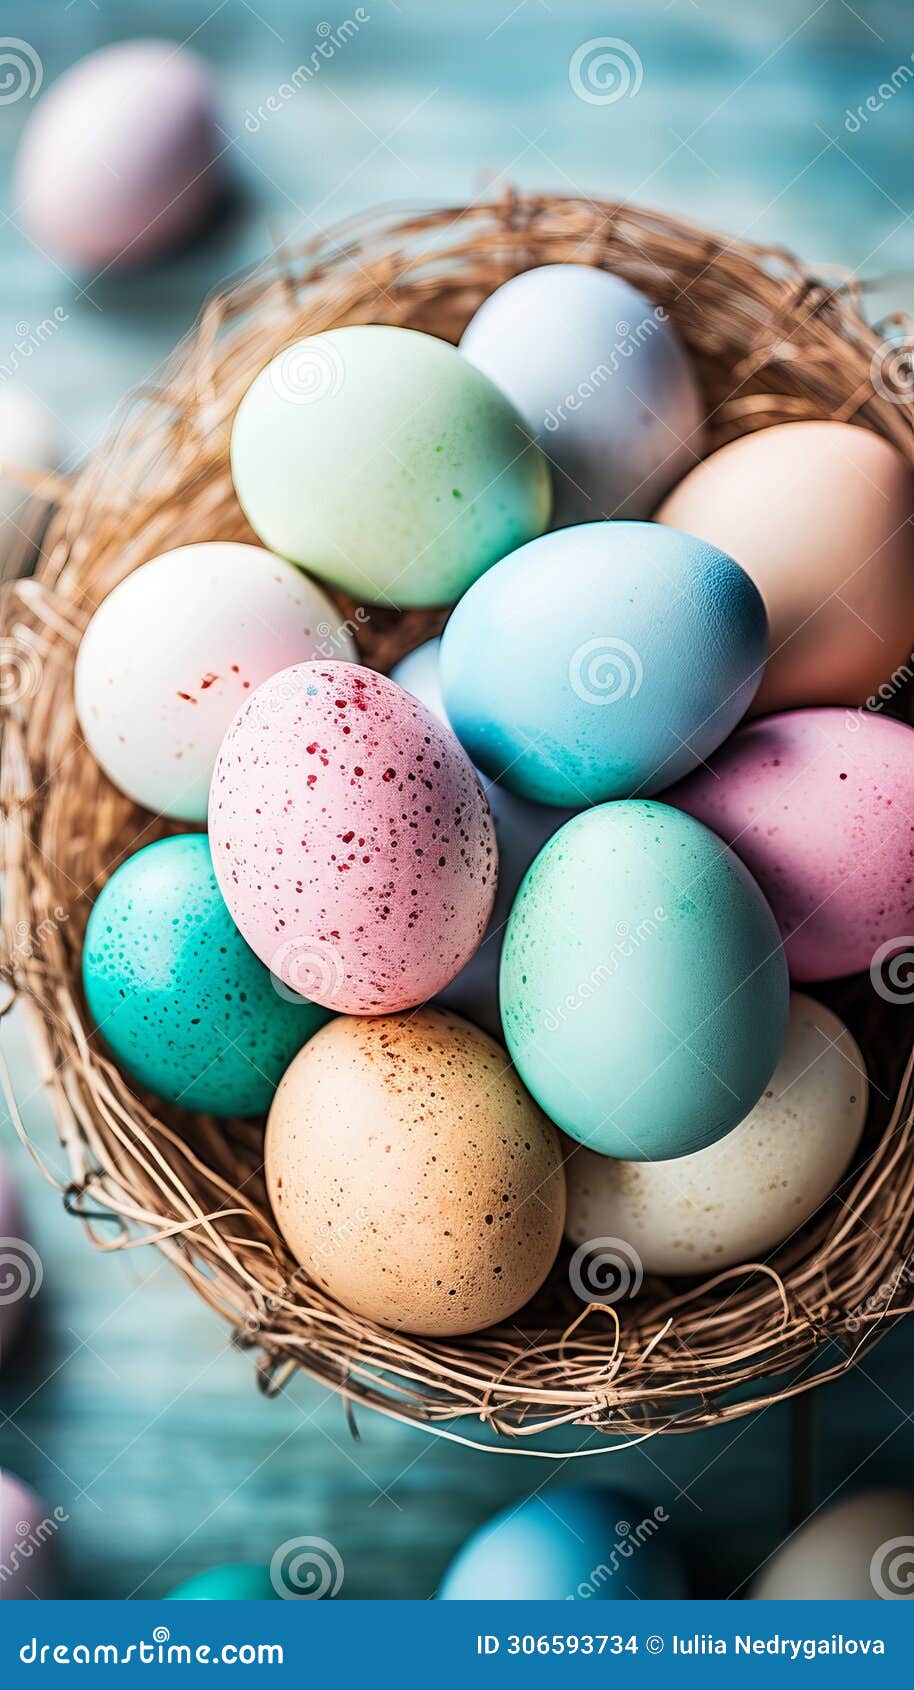 vibrant easter eggs in basket - colorful and lively spring decor with space for text